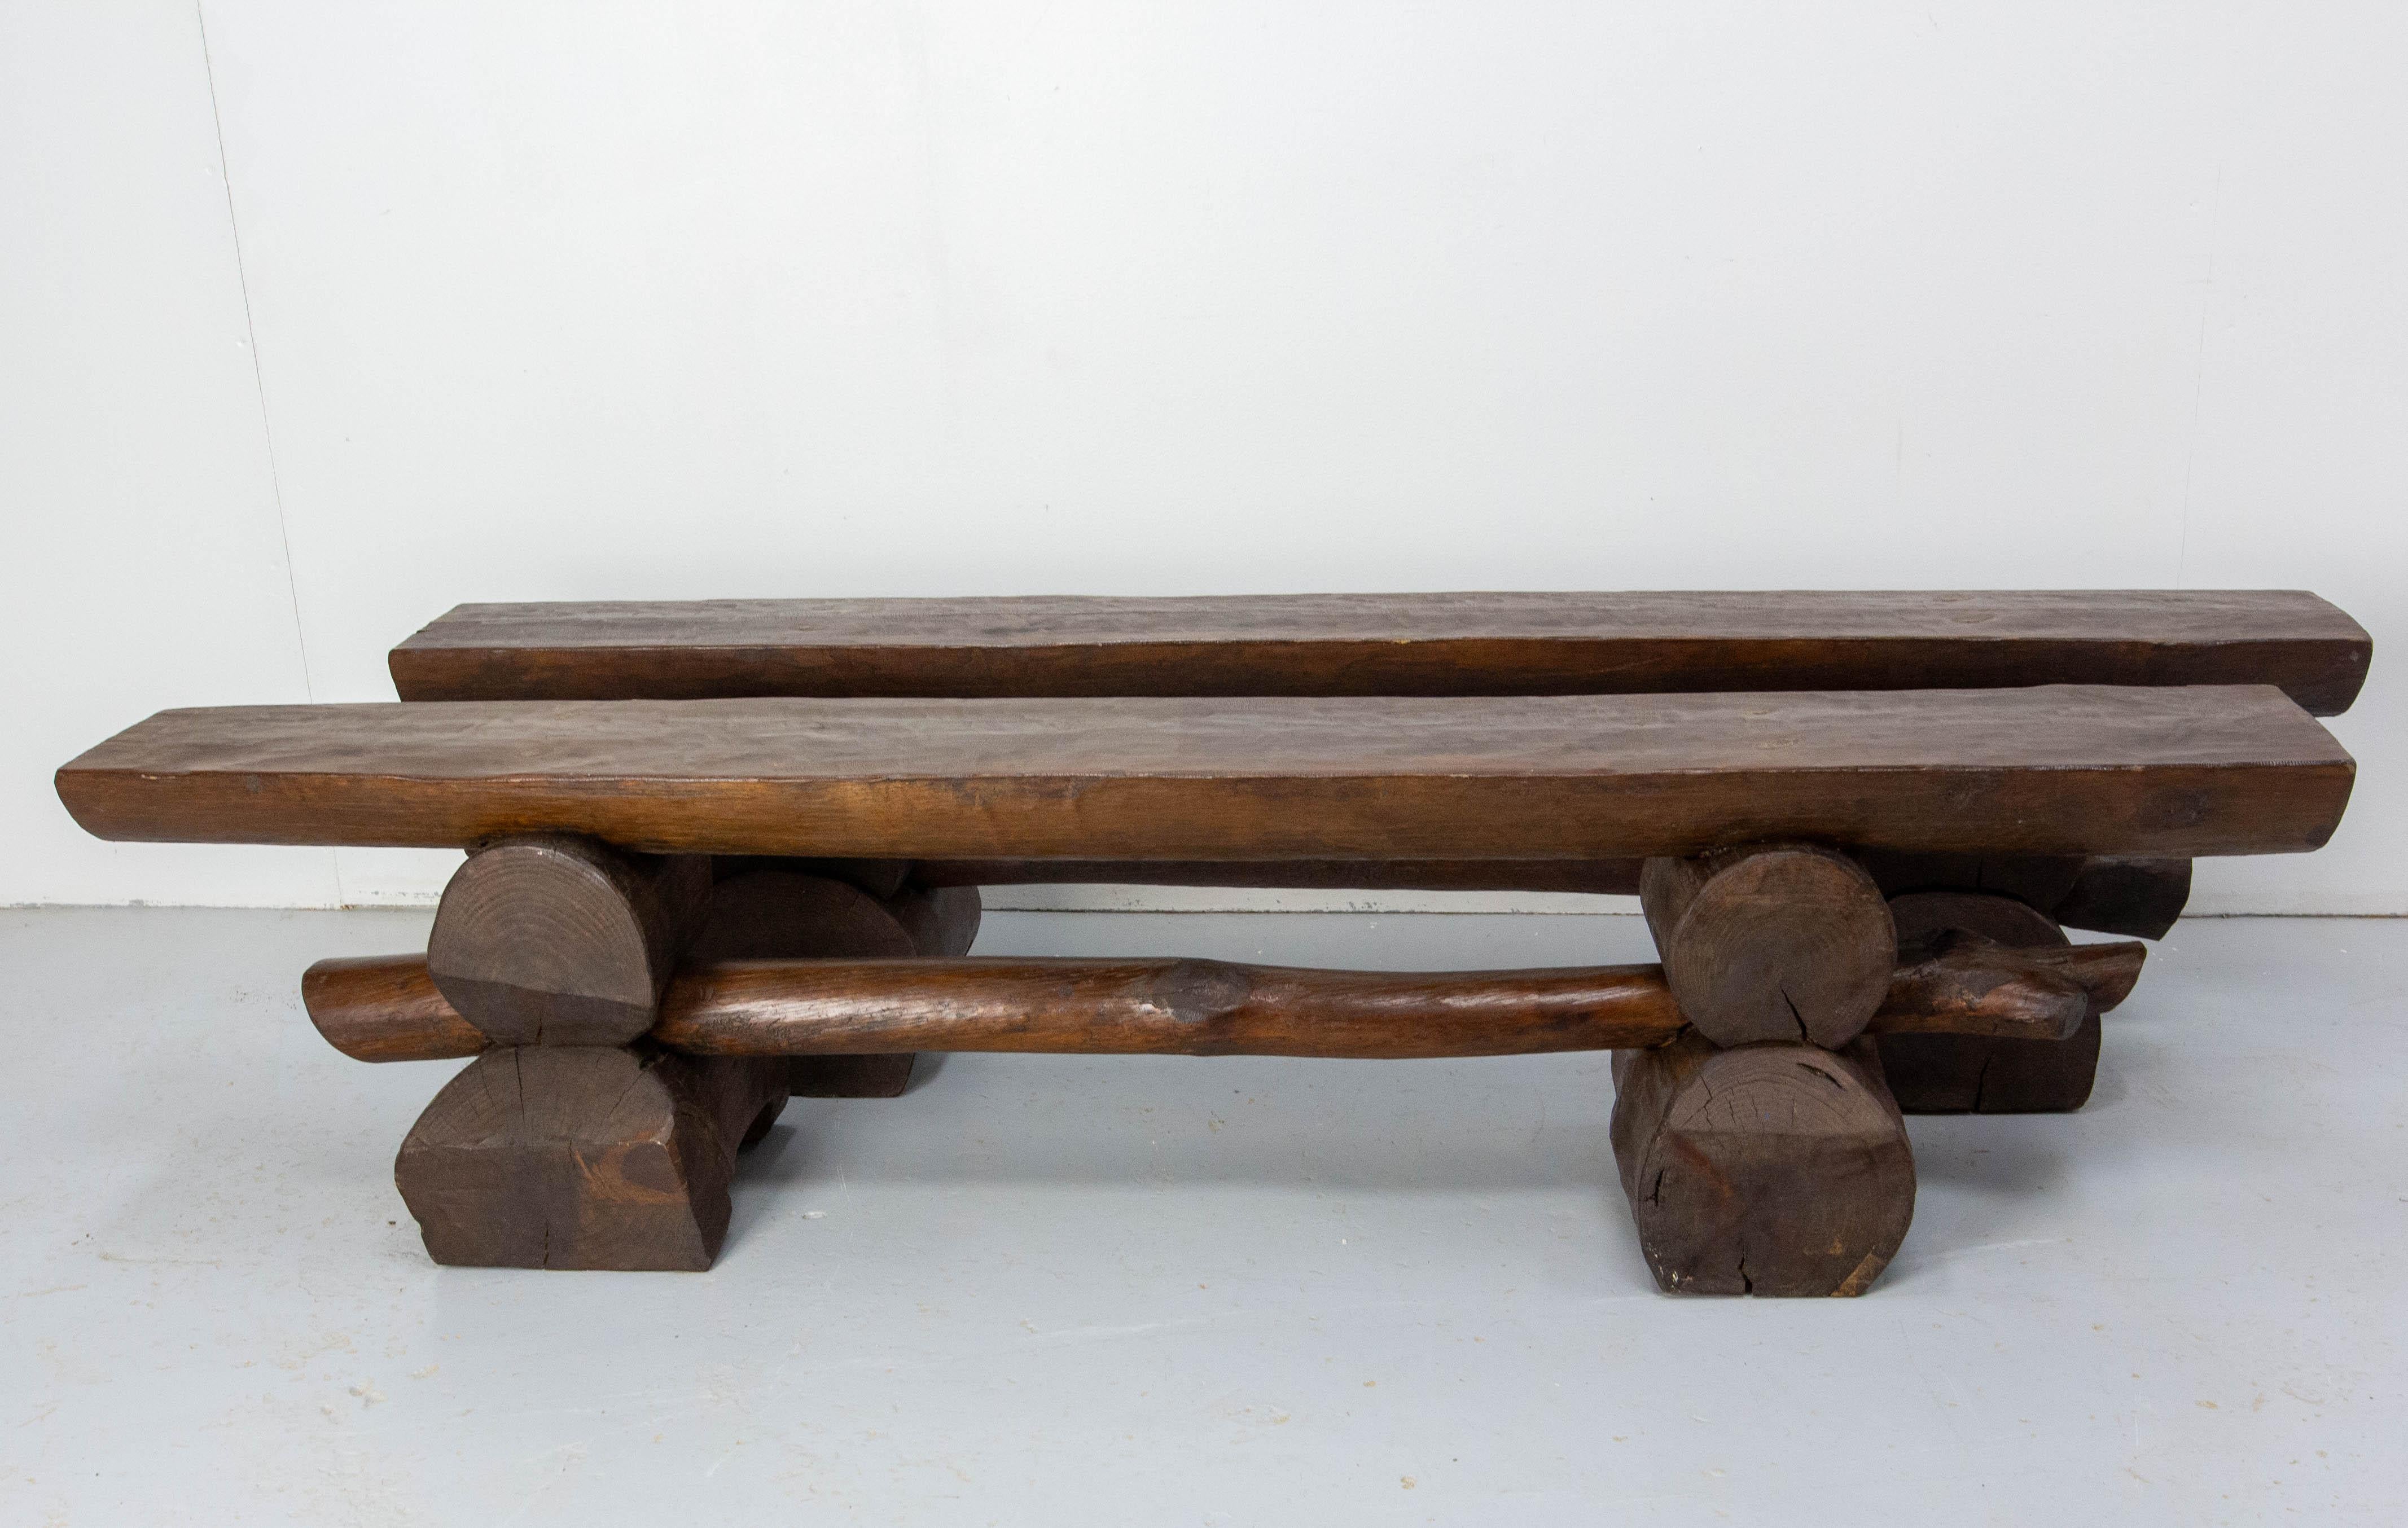 French pair of benches made circa 1960.
Brutalist style made with trunks and half trunks.
Small traces of blue paint, nothing disturbing (please see last photo)
In original vintage condition sound and solid.


Shipping:
60 / 39 / 165 cm 58 kg 